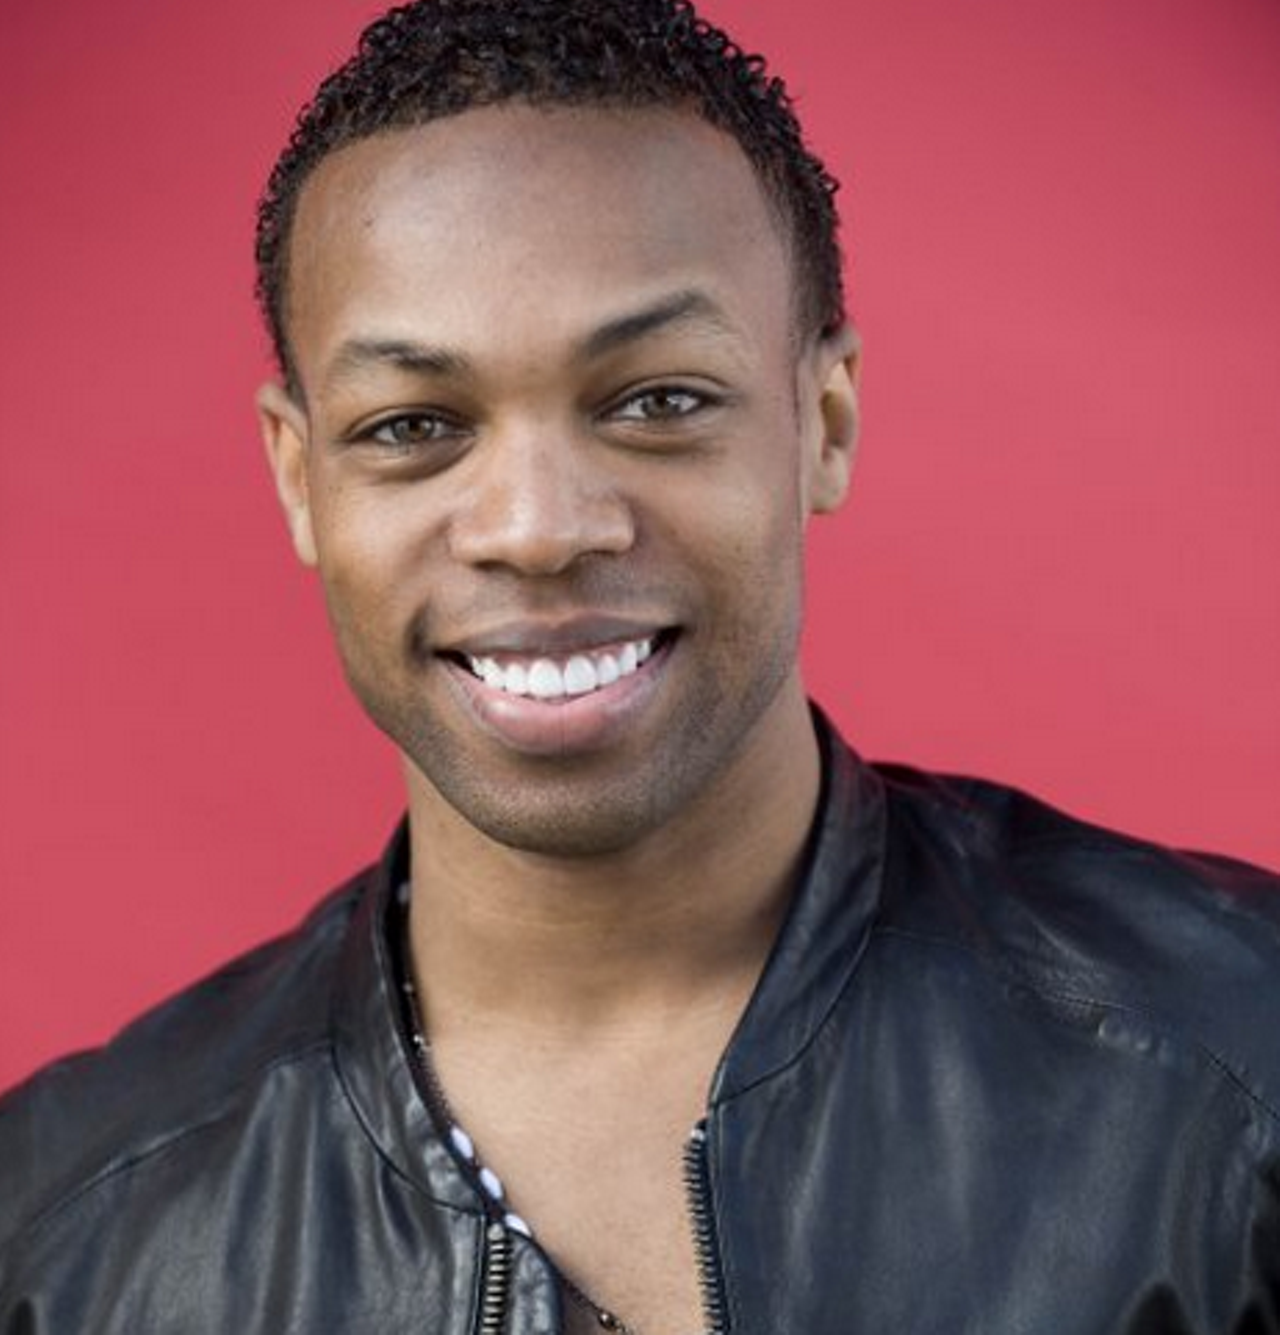 A finalist on season 9 of American Idol, singer Todrick Hall has become a YouTube sensation. He’s been on Broadway with Oprah’s The Color Purple and had a role in the Tony Award-winning Memphis: The Musical. For his current show, Twerk Du Soleil, he does his best to re-enact his YouTube videos. He also plays a few covers and performs a few comedic skits. He promises to have “special guests” at tonight’s show. The show starts at 7:30 p.m. at the Beachland Ballroom and tickets range from $25 to $80. (Niesel)